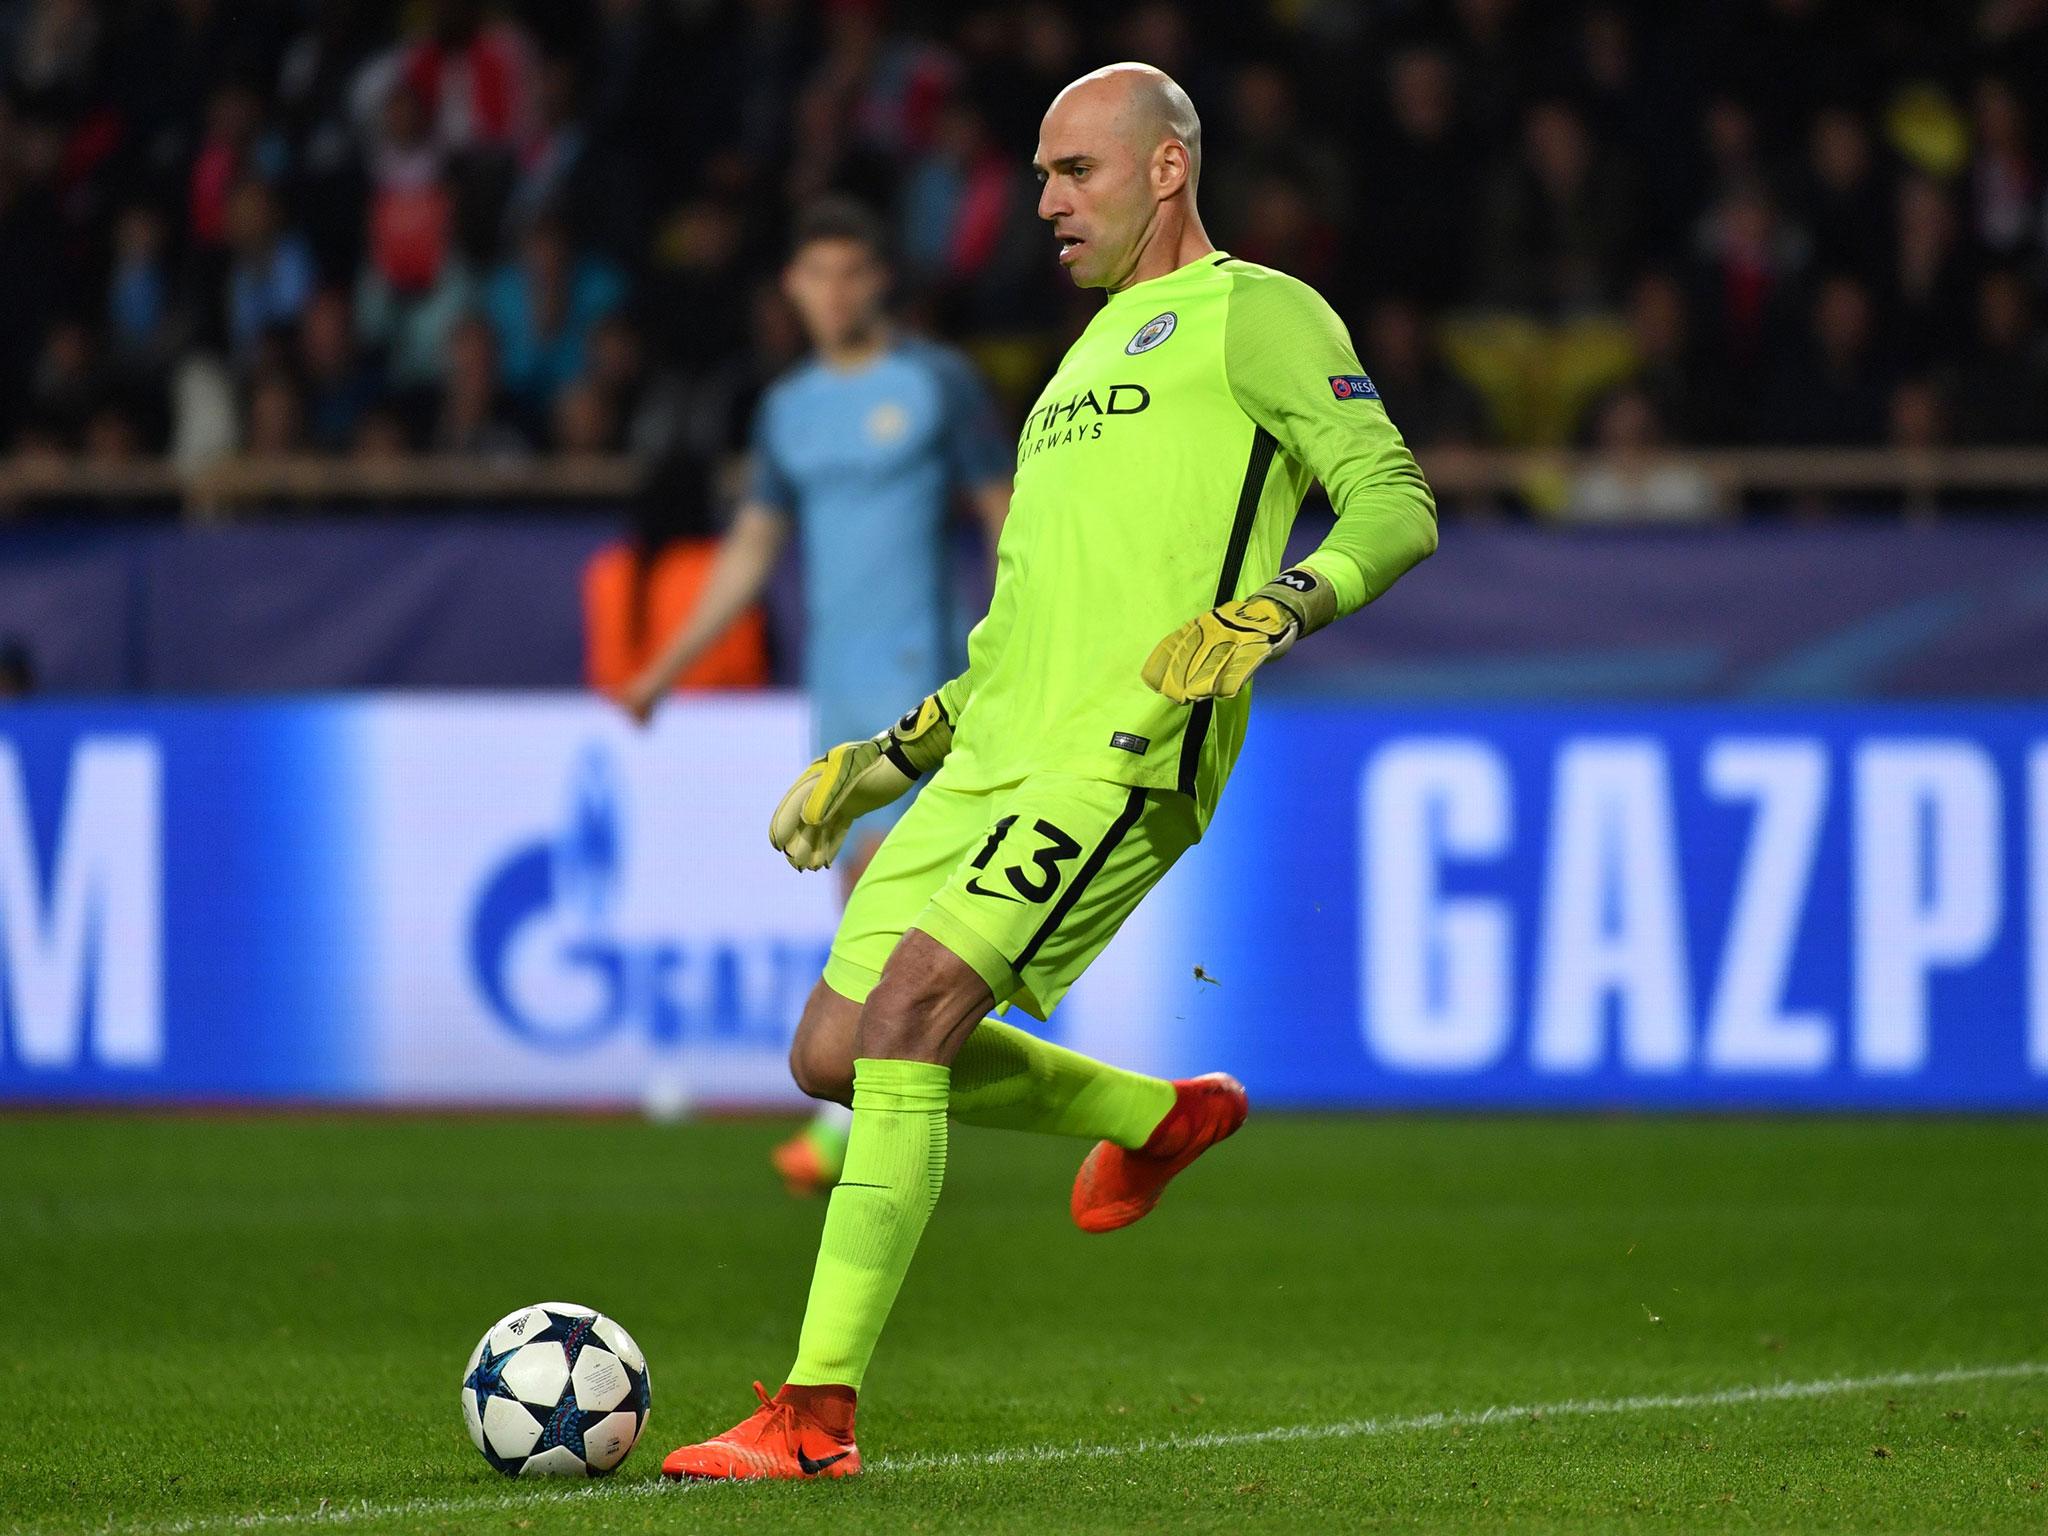 Willy Caballero was released by Manchester City at the end of last season